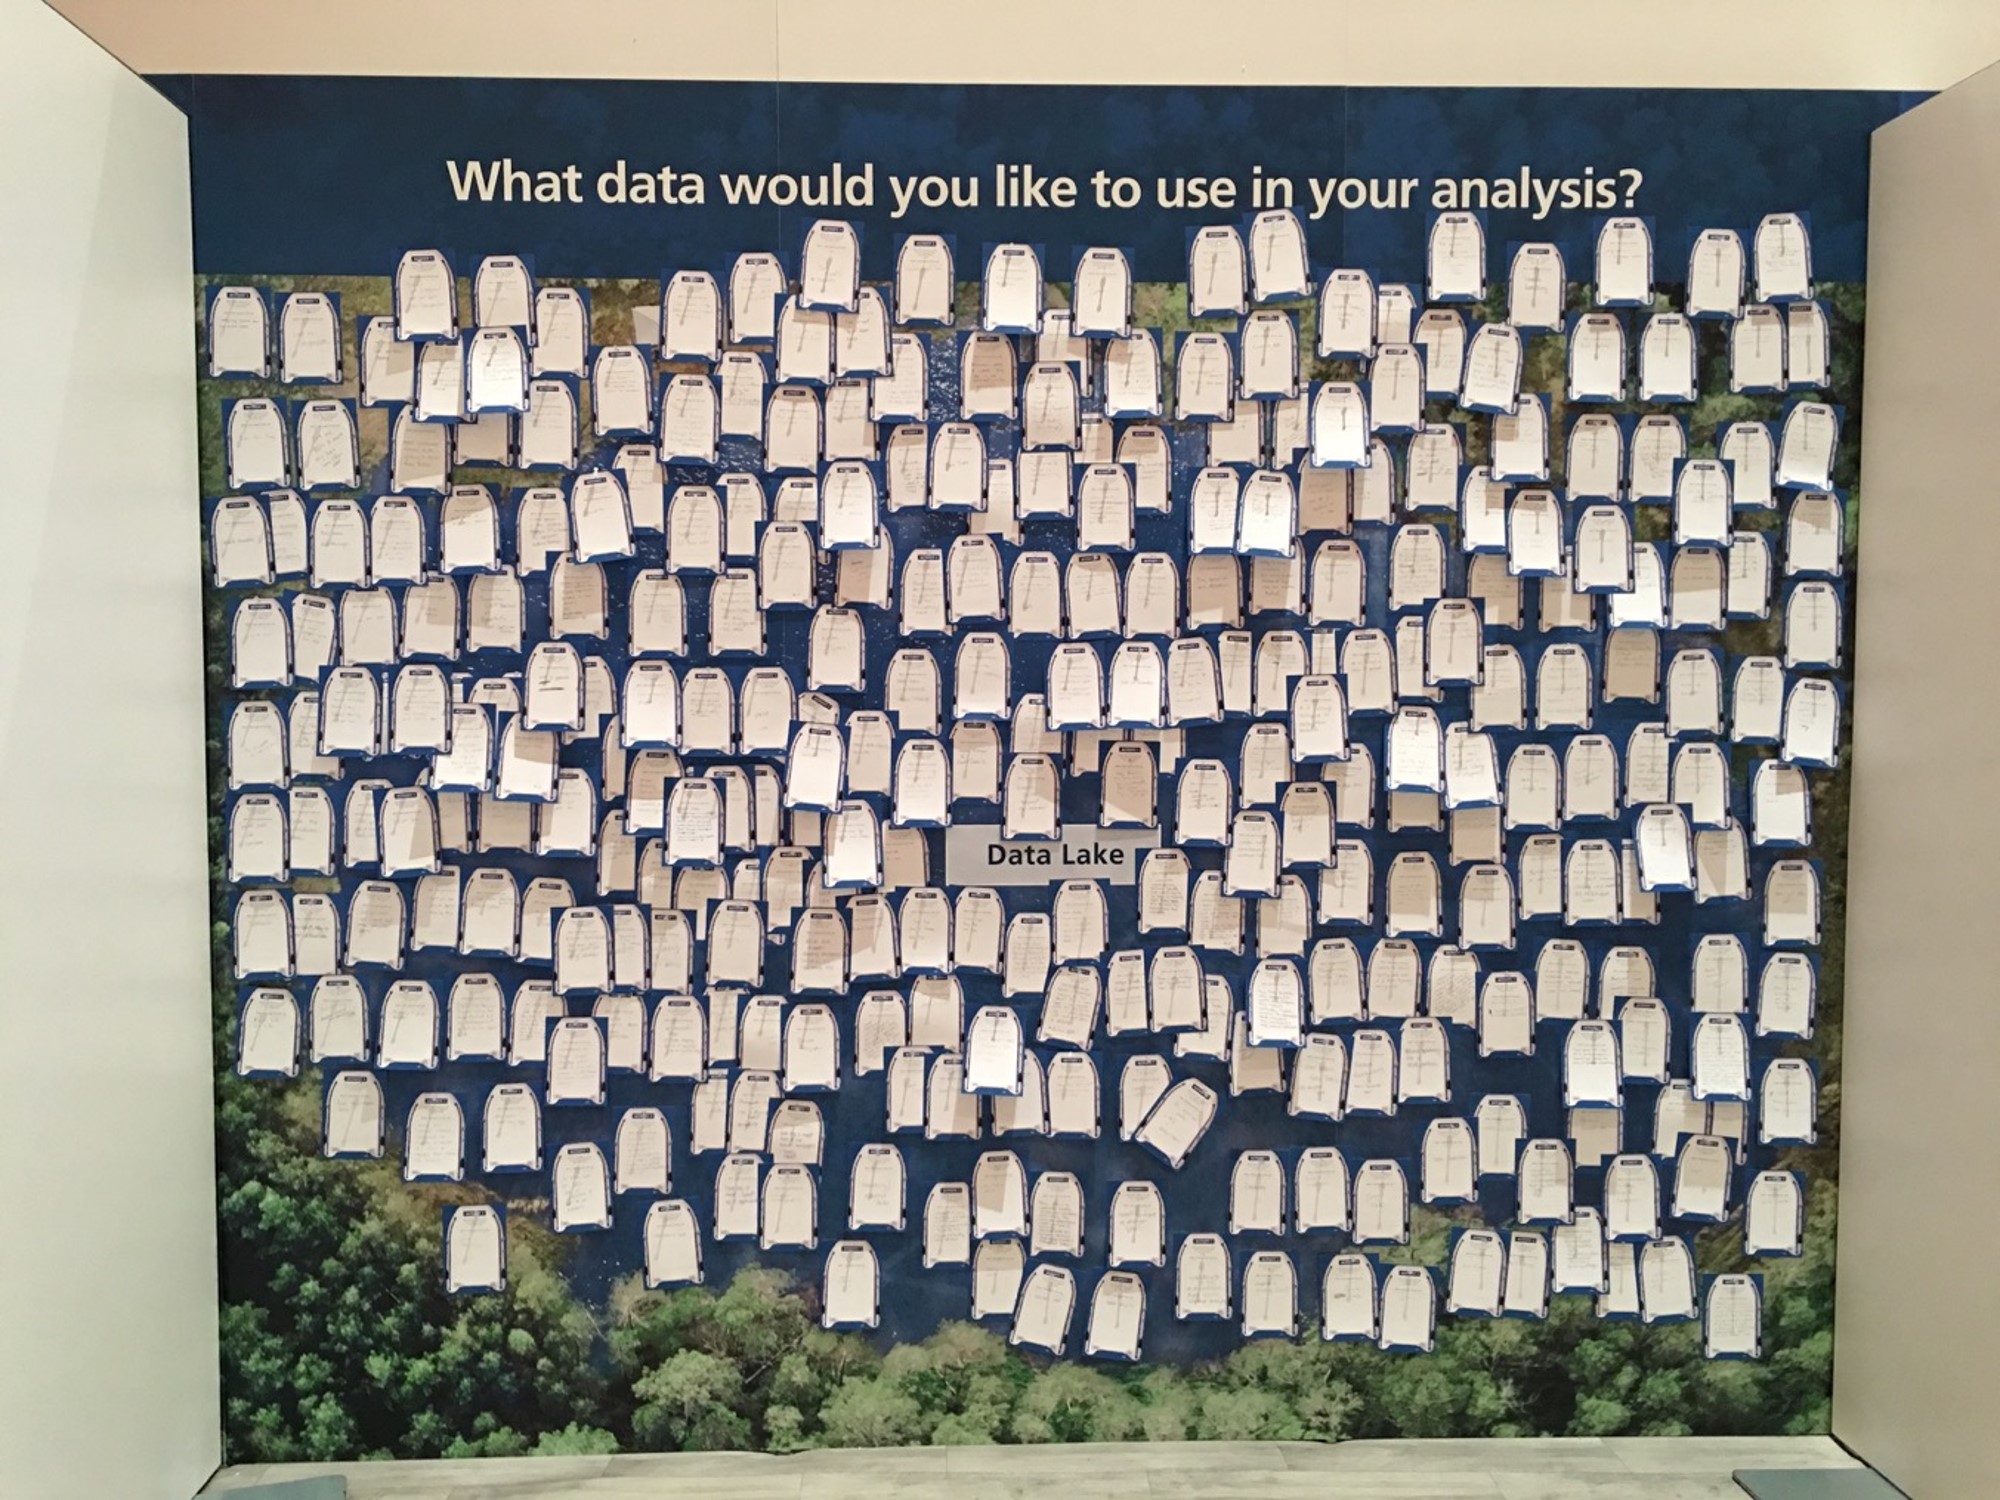 Wall of an exhibit with pieces of paper on it